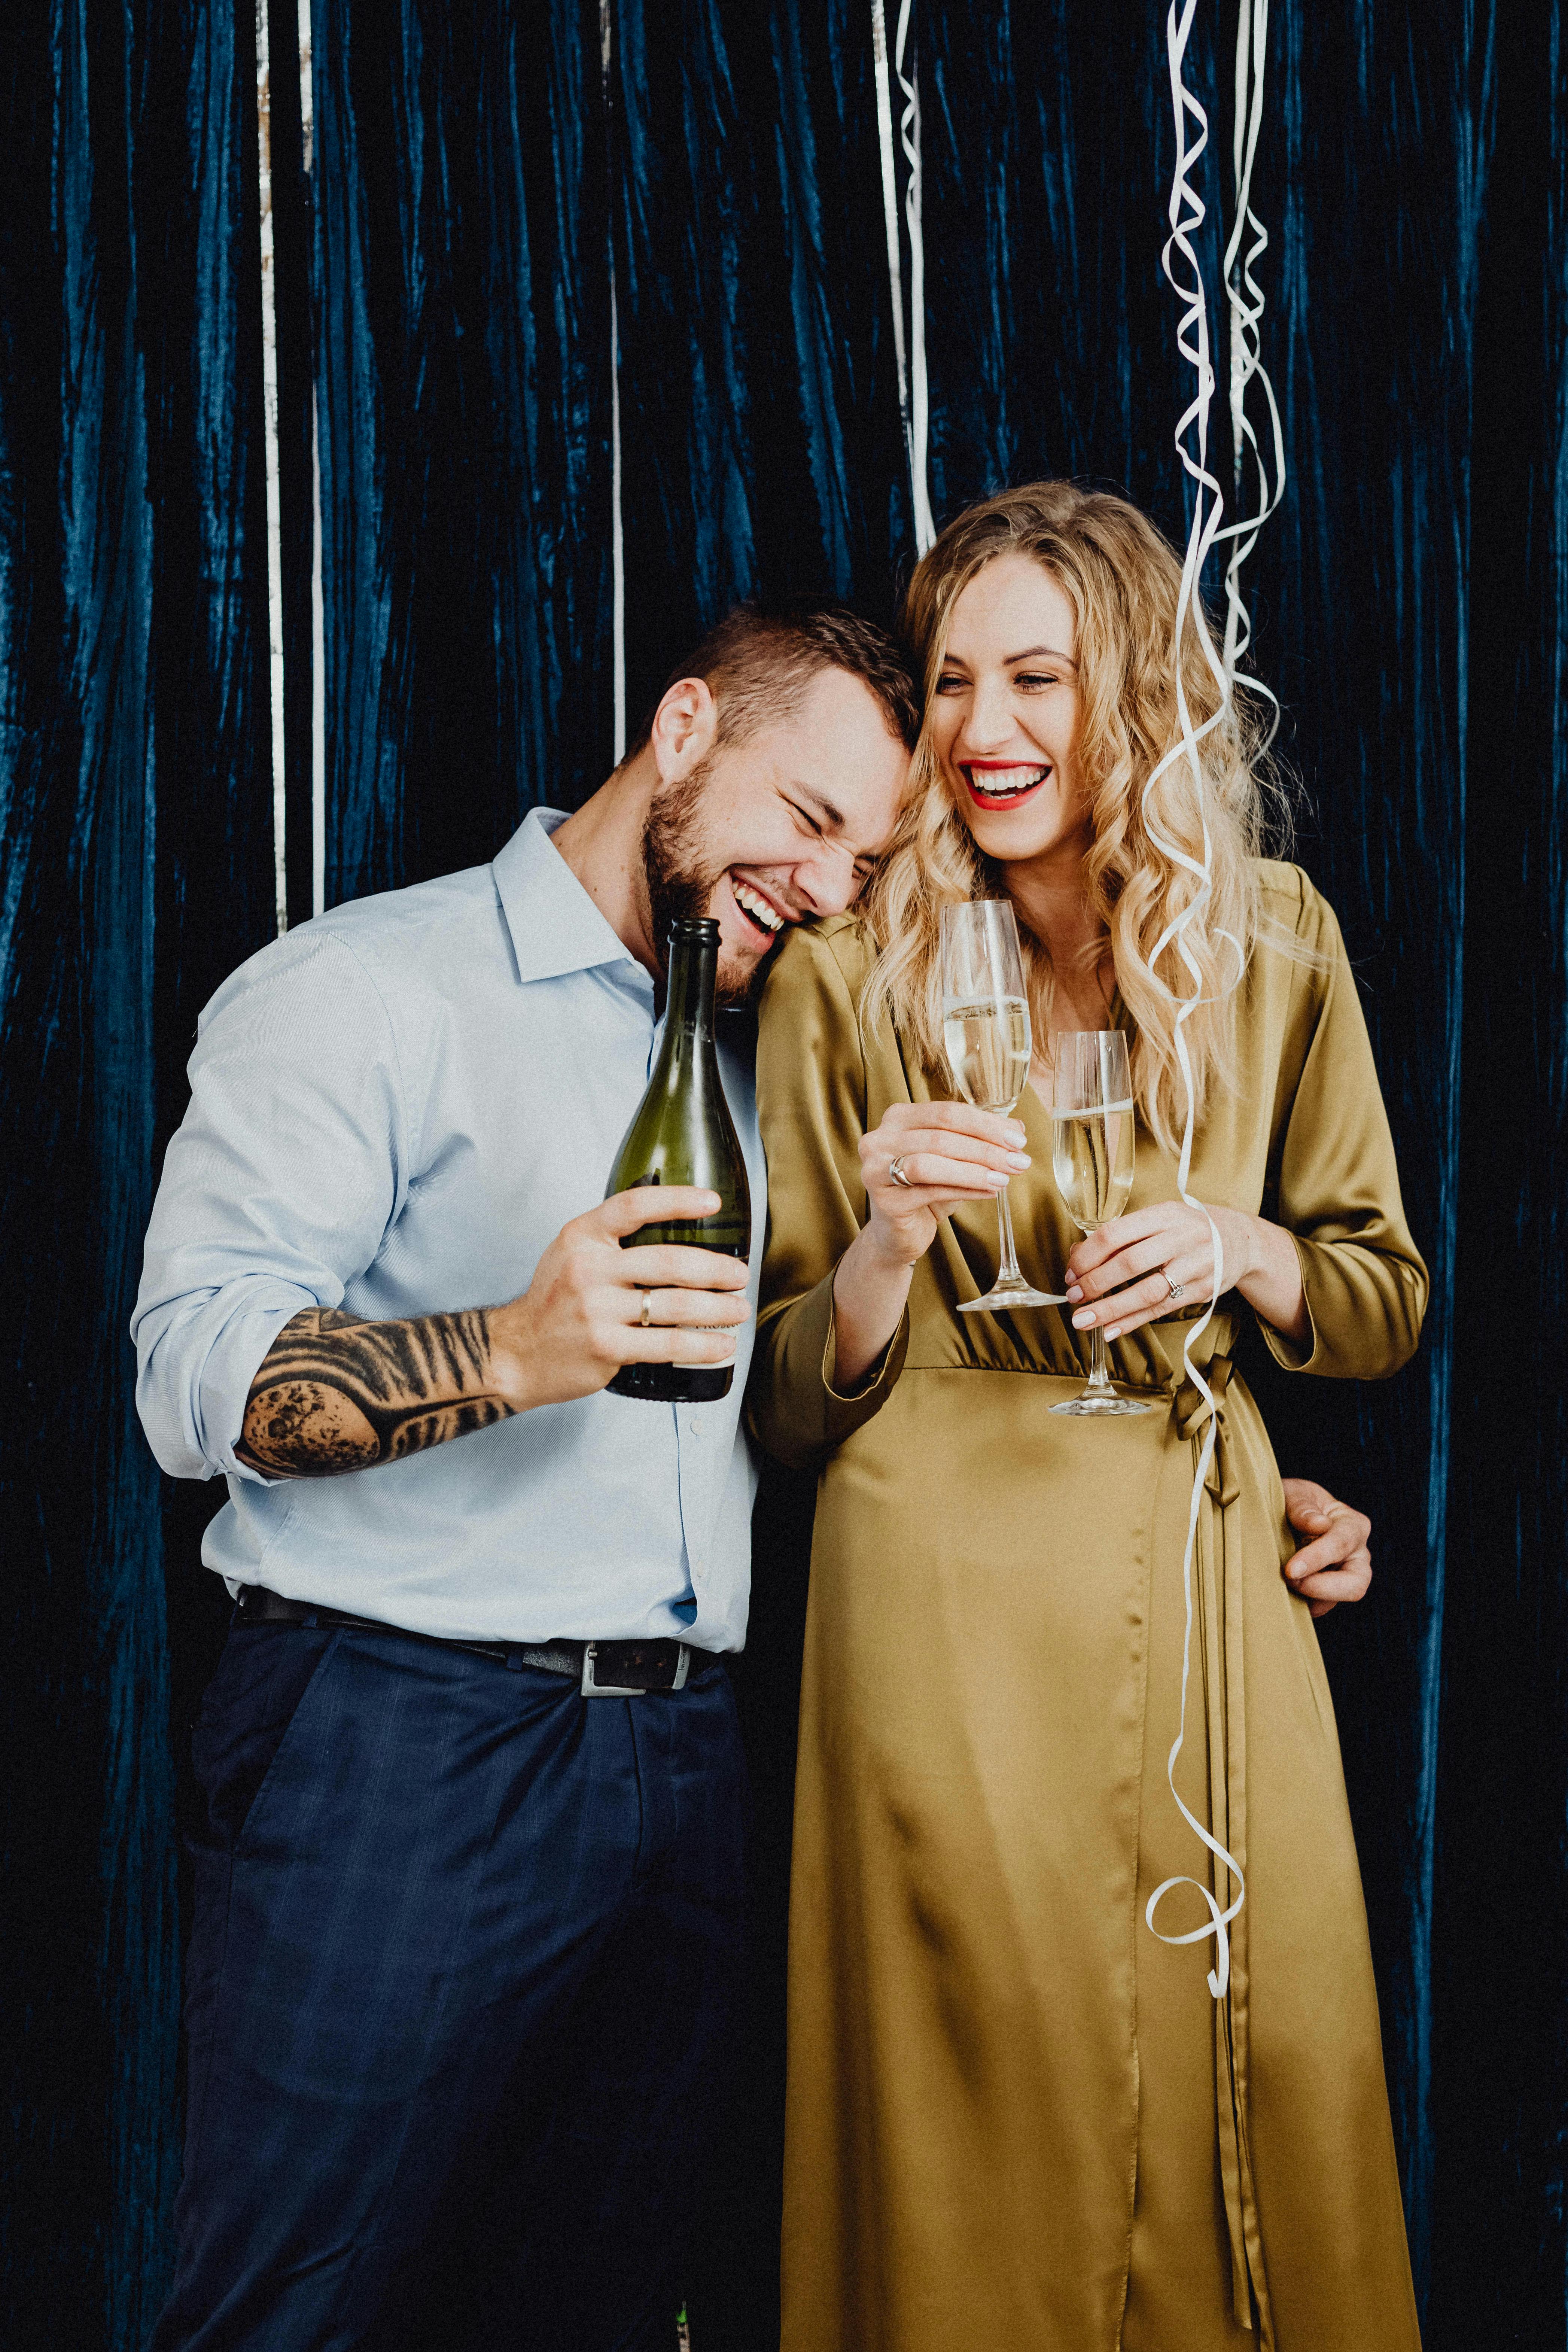 A happy couple at a party | Source: Pexels